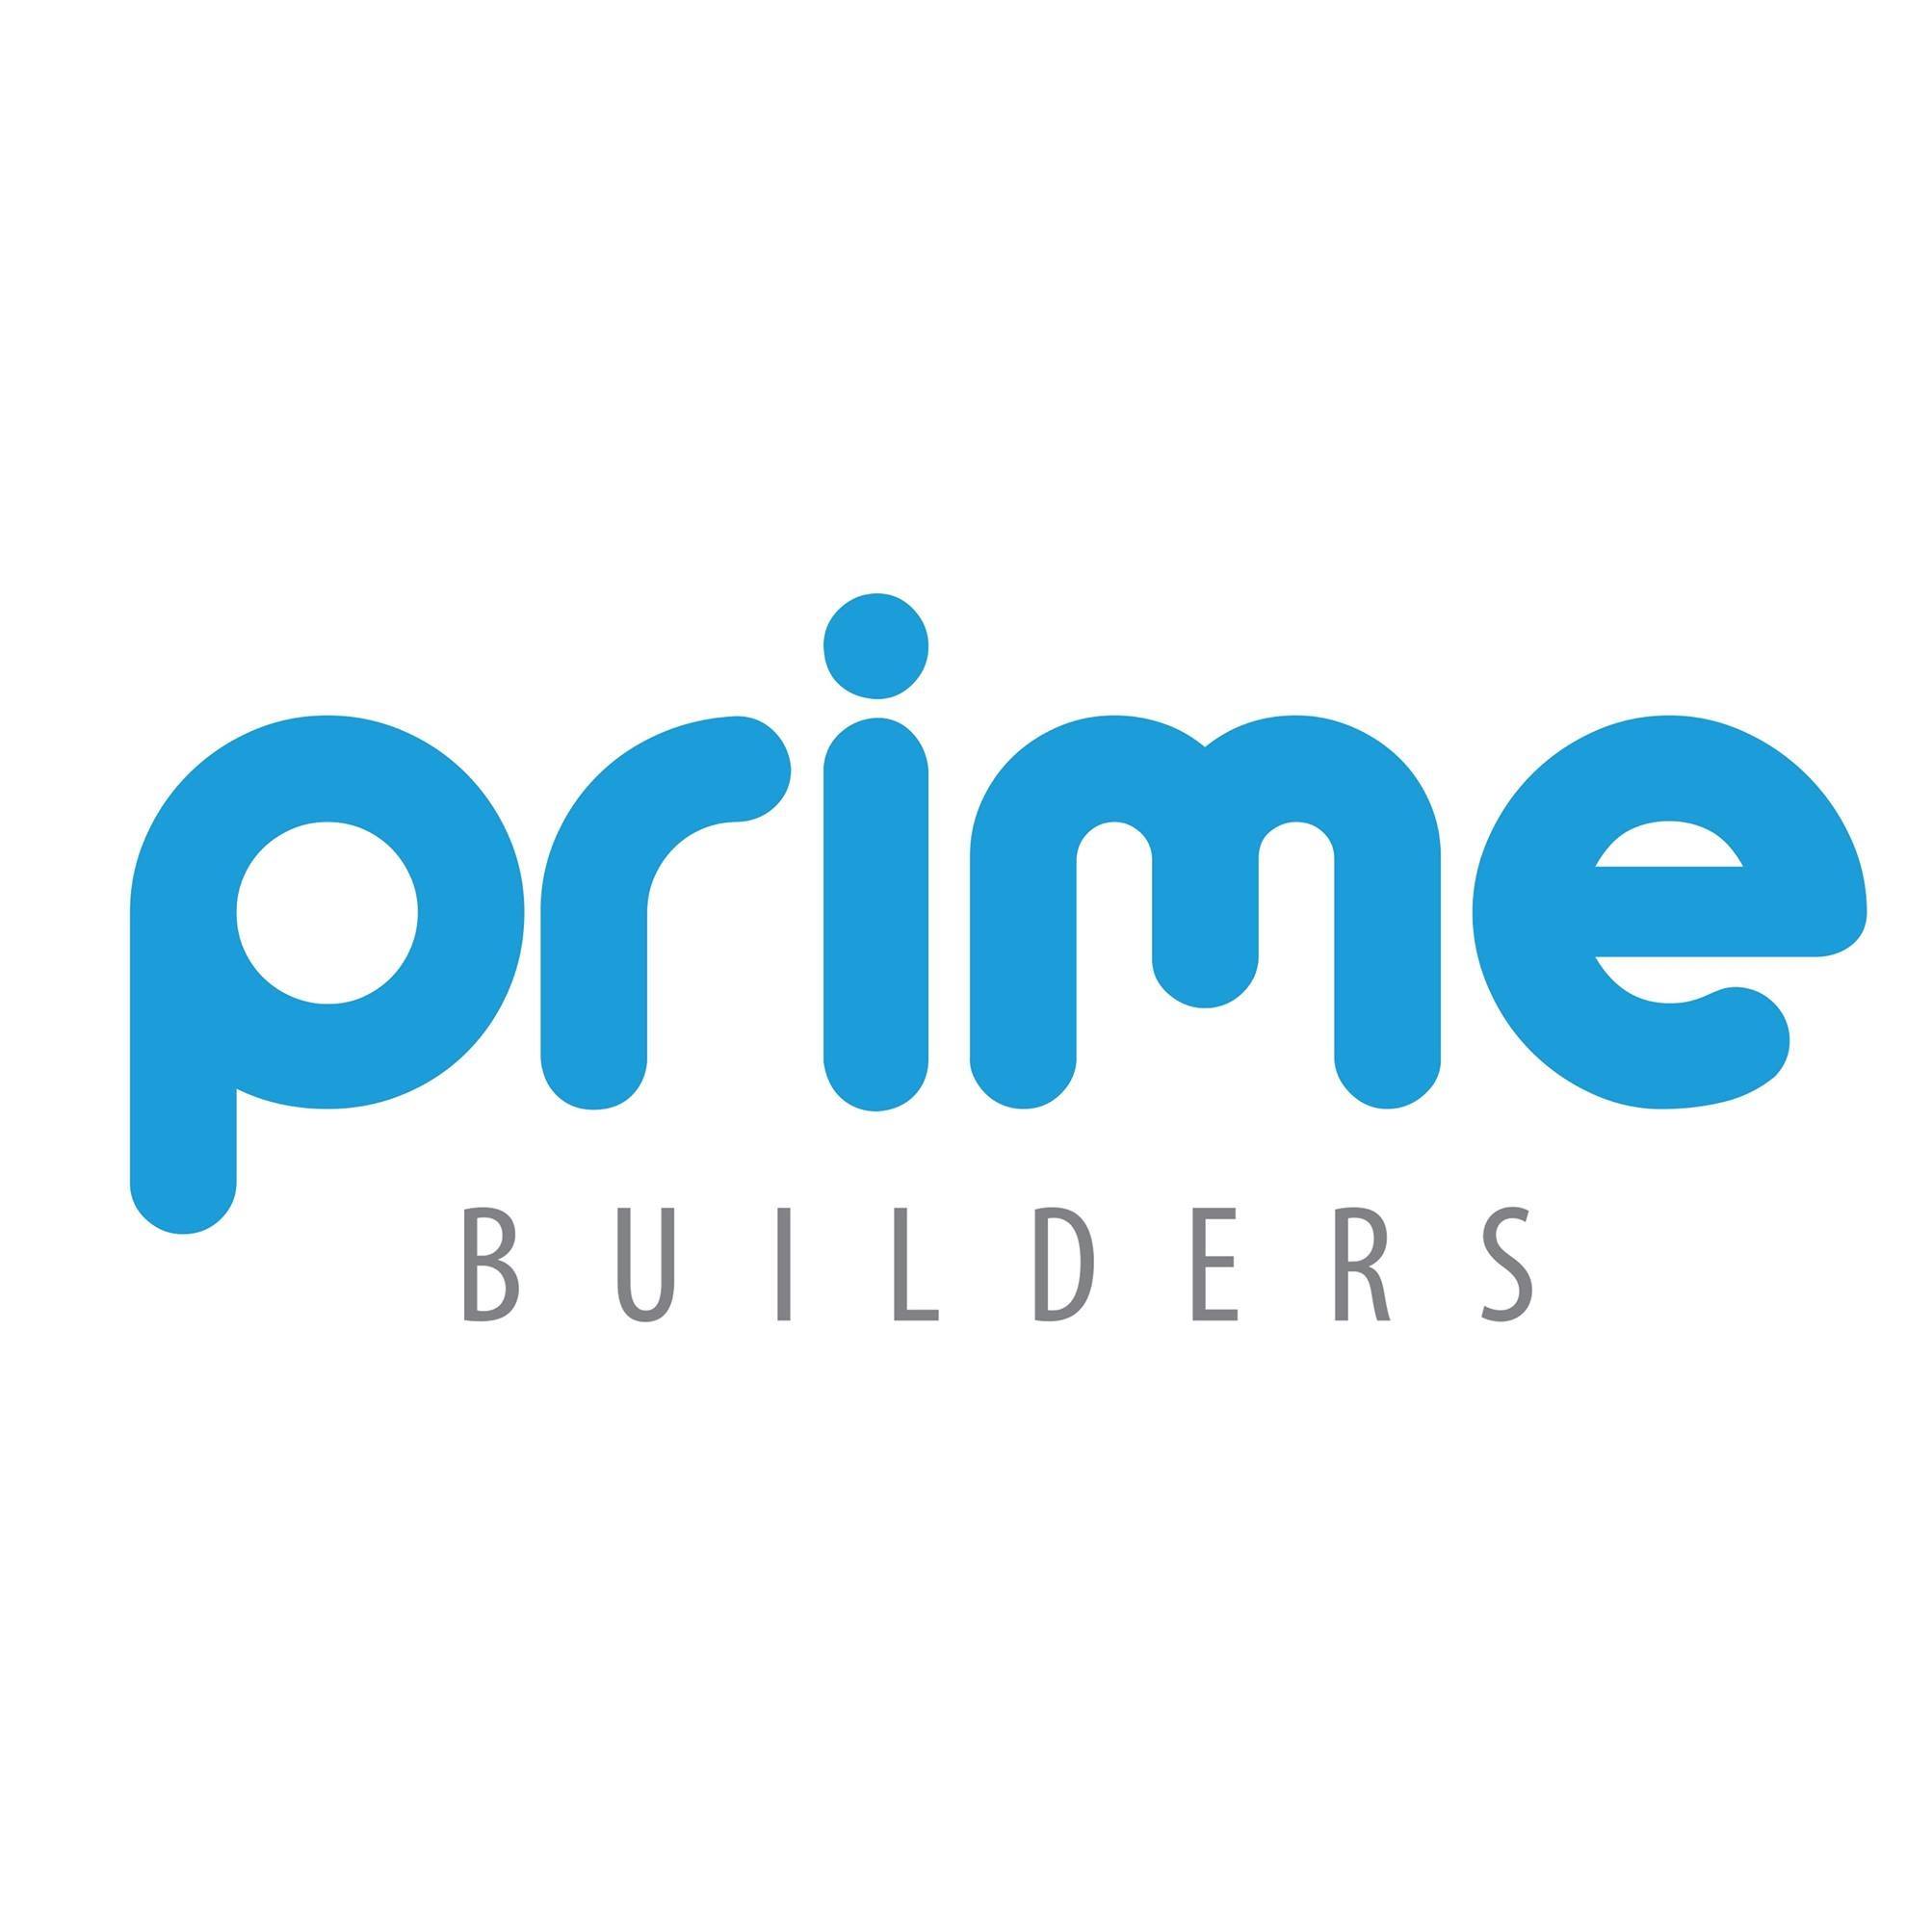 Prime Builders and Architects|IT Services|Professional Services